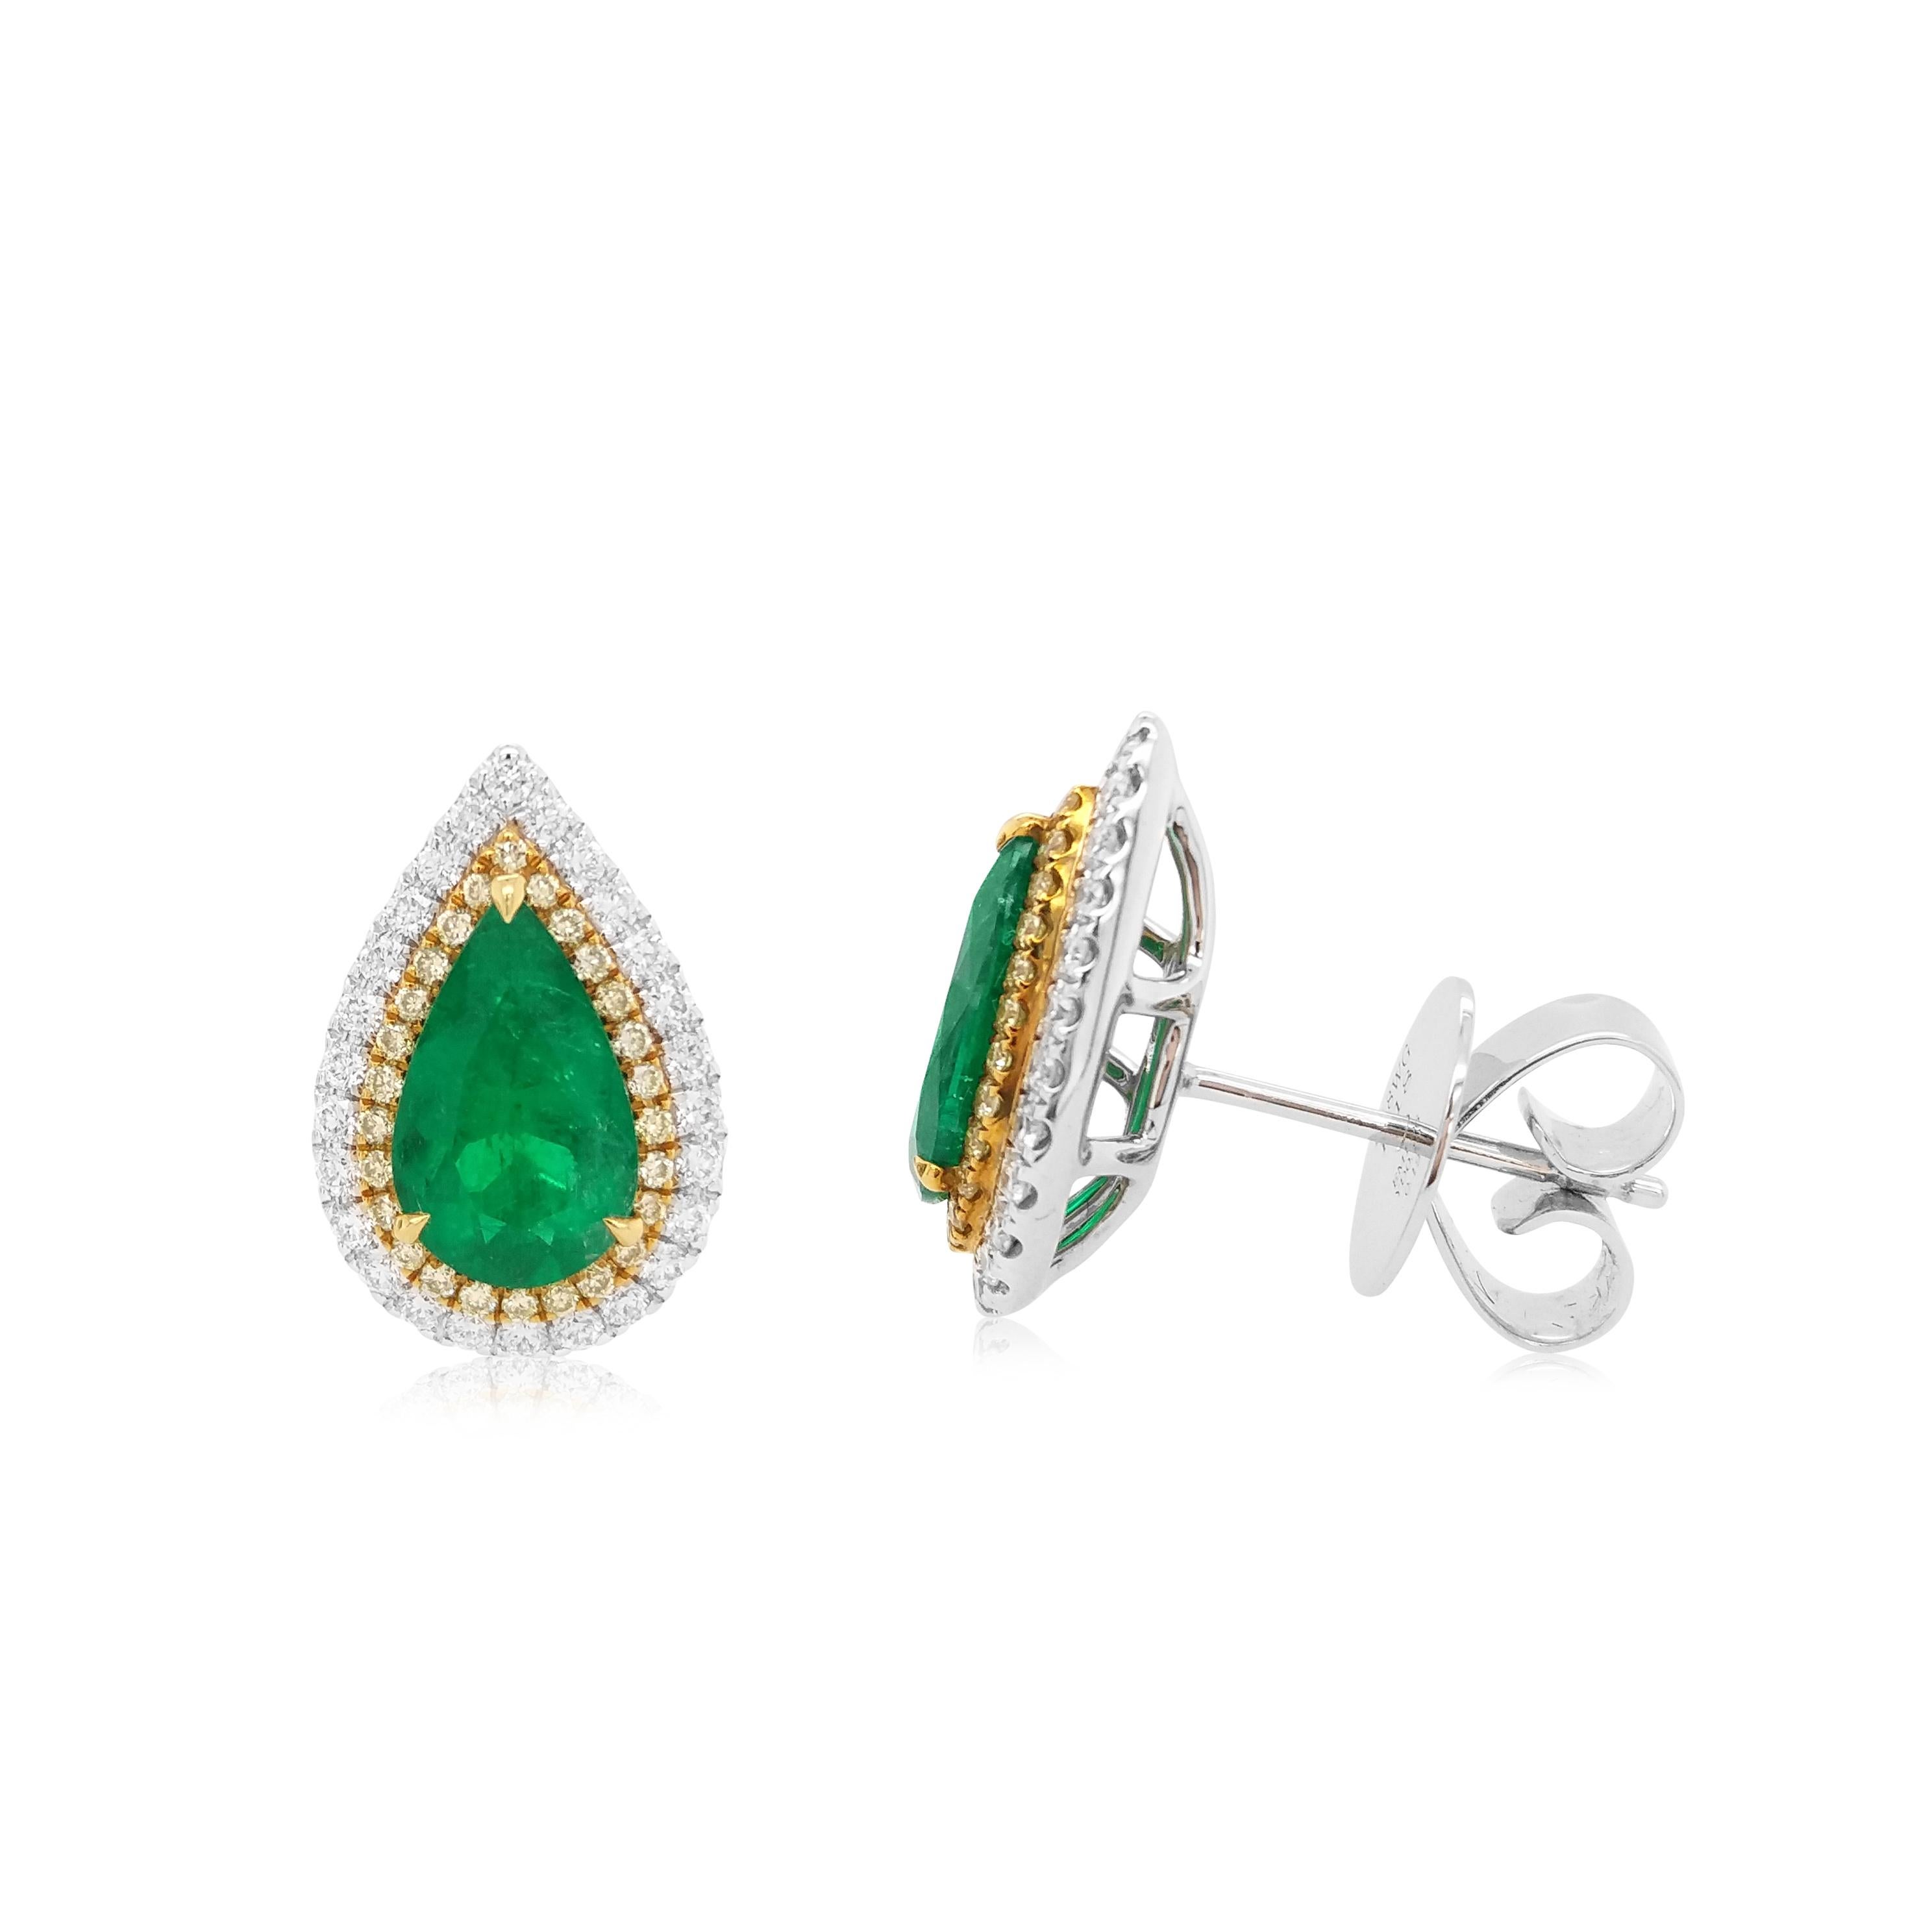 These important earrings feature rich hue Colombian Emeralds set among clusters of Yellow and White diamonds. An iconic design re-imagined, these earrings are sure to bestow the wearer with a glamorous look, each time they are worn.
-	Pear Shape